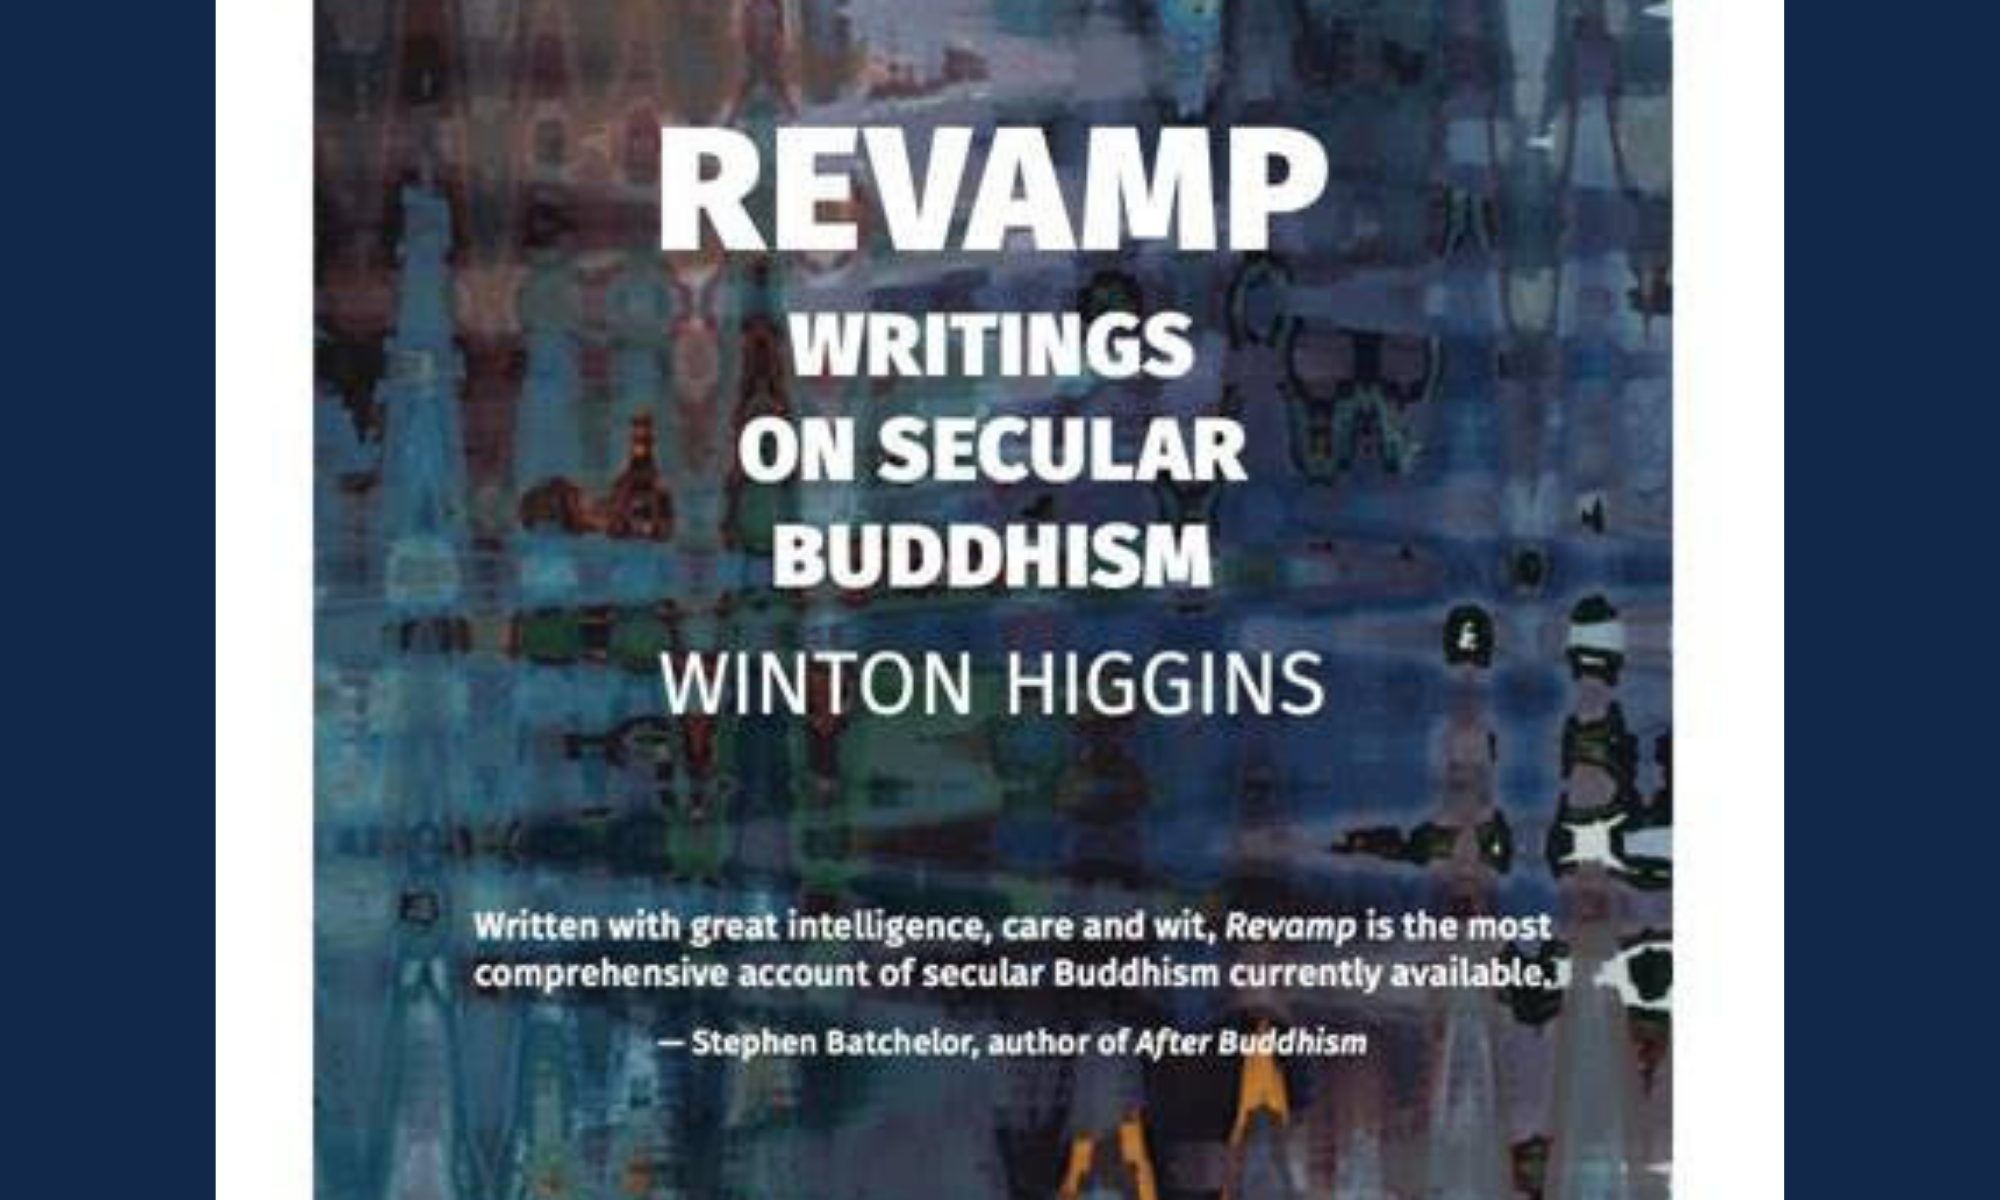 Revamp: Writings on Secular Buddhism by Winton Higgins